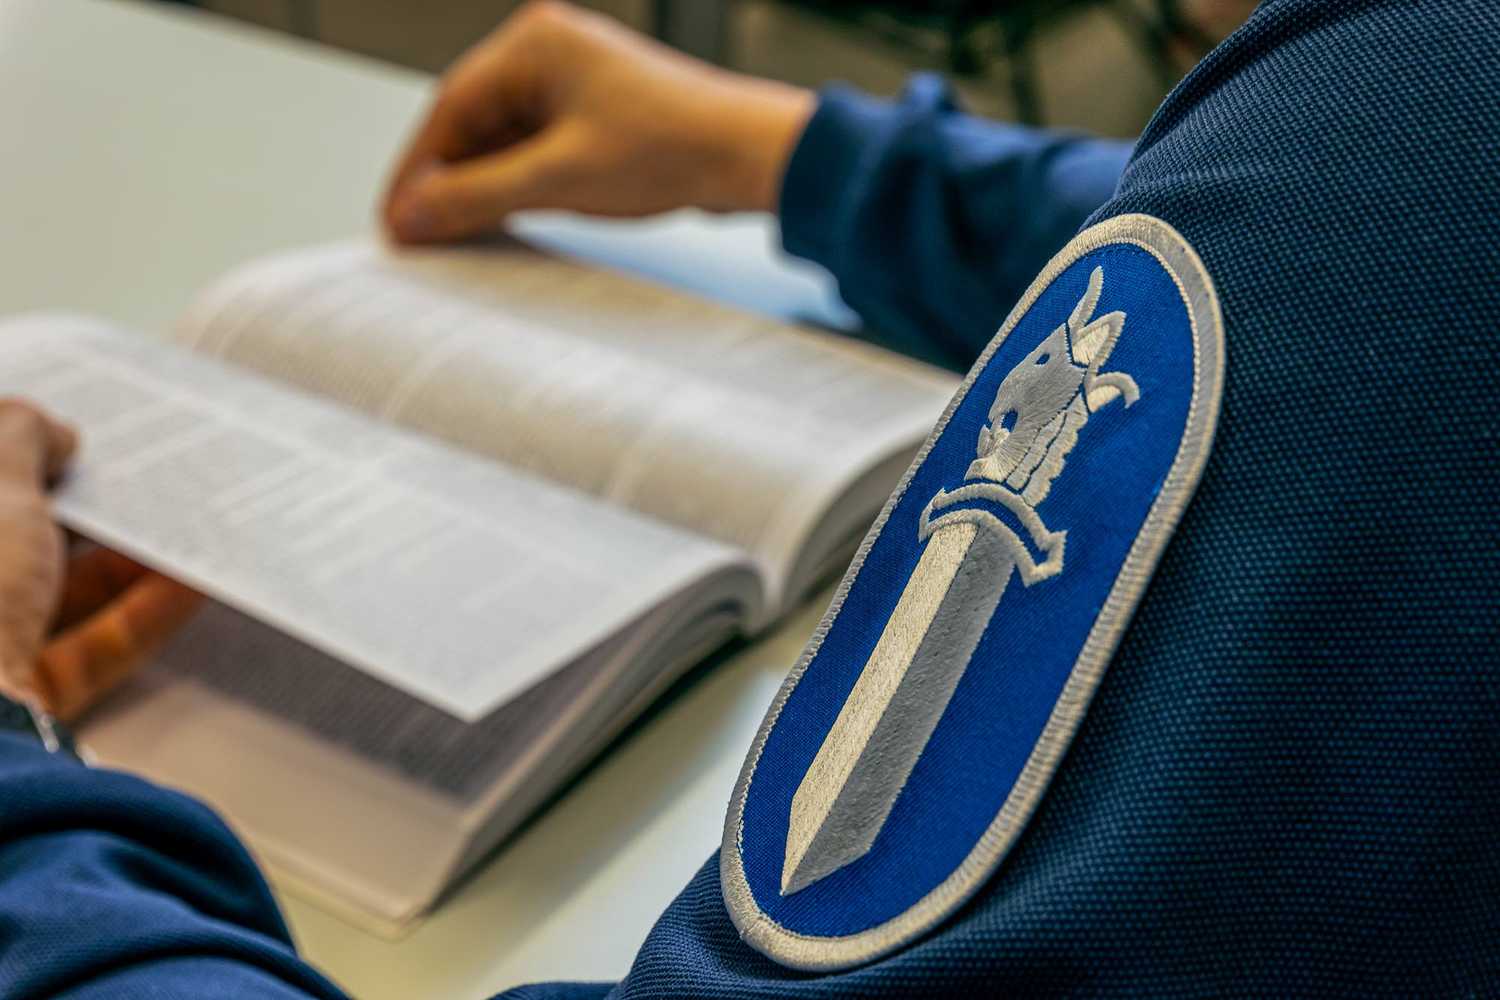 The police read the law book. Police sword emblem on the front sleeve.